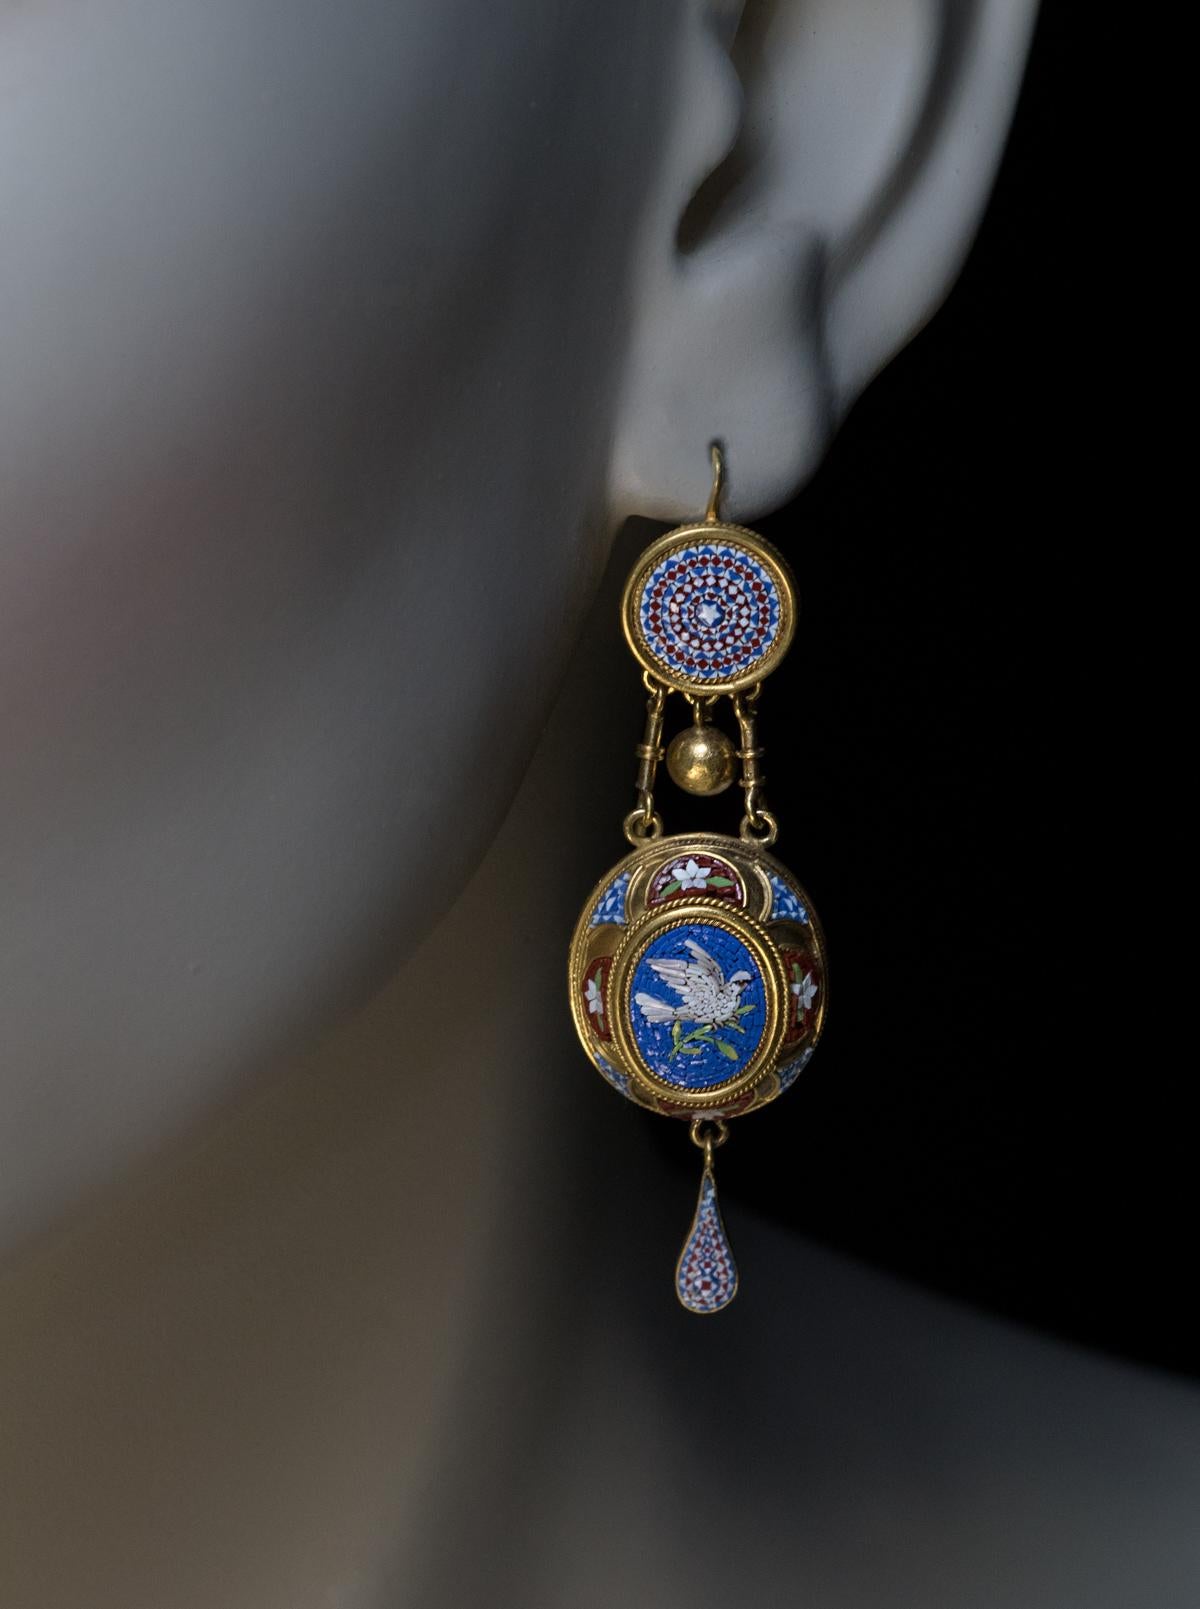 Rome, circa 1850

An early Victorian era Italian micromosaic and 18K gold set comprising dangle earrings and a brooch / pendant. The set is designed in Etruscan revival style fashionable in the mid 19th century.

The brooch / pendant features a pair